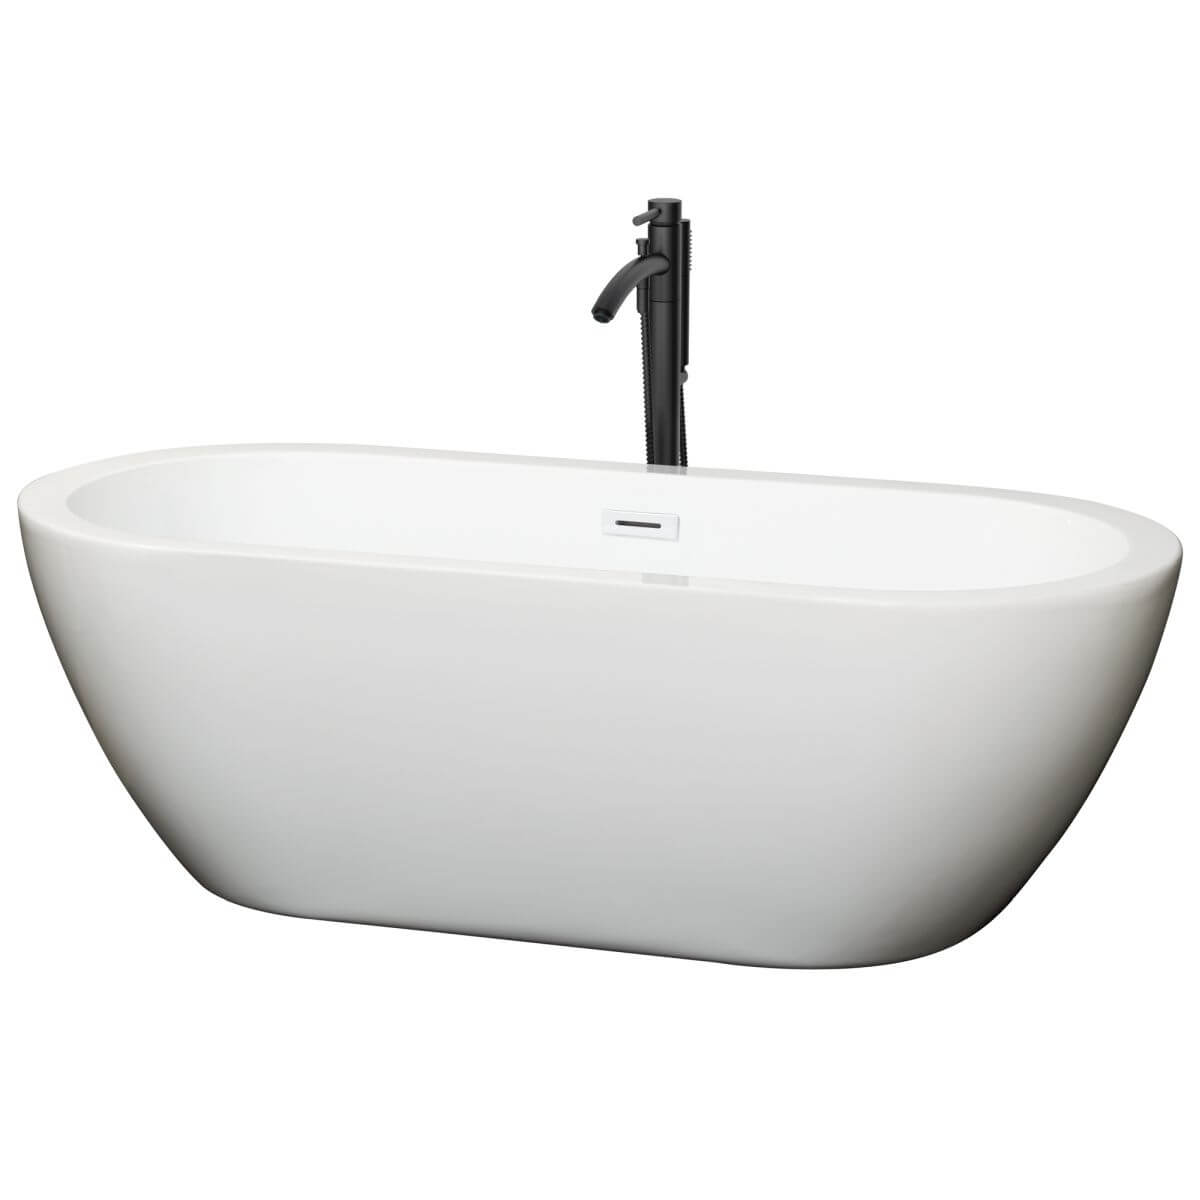 Wyndham Collection Soho 68 inch Freestanding Bathtub in White with Shiny White Trim and Floor Mounted Faucet in Matte Black - WCOBT100268SWATPBK